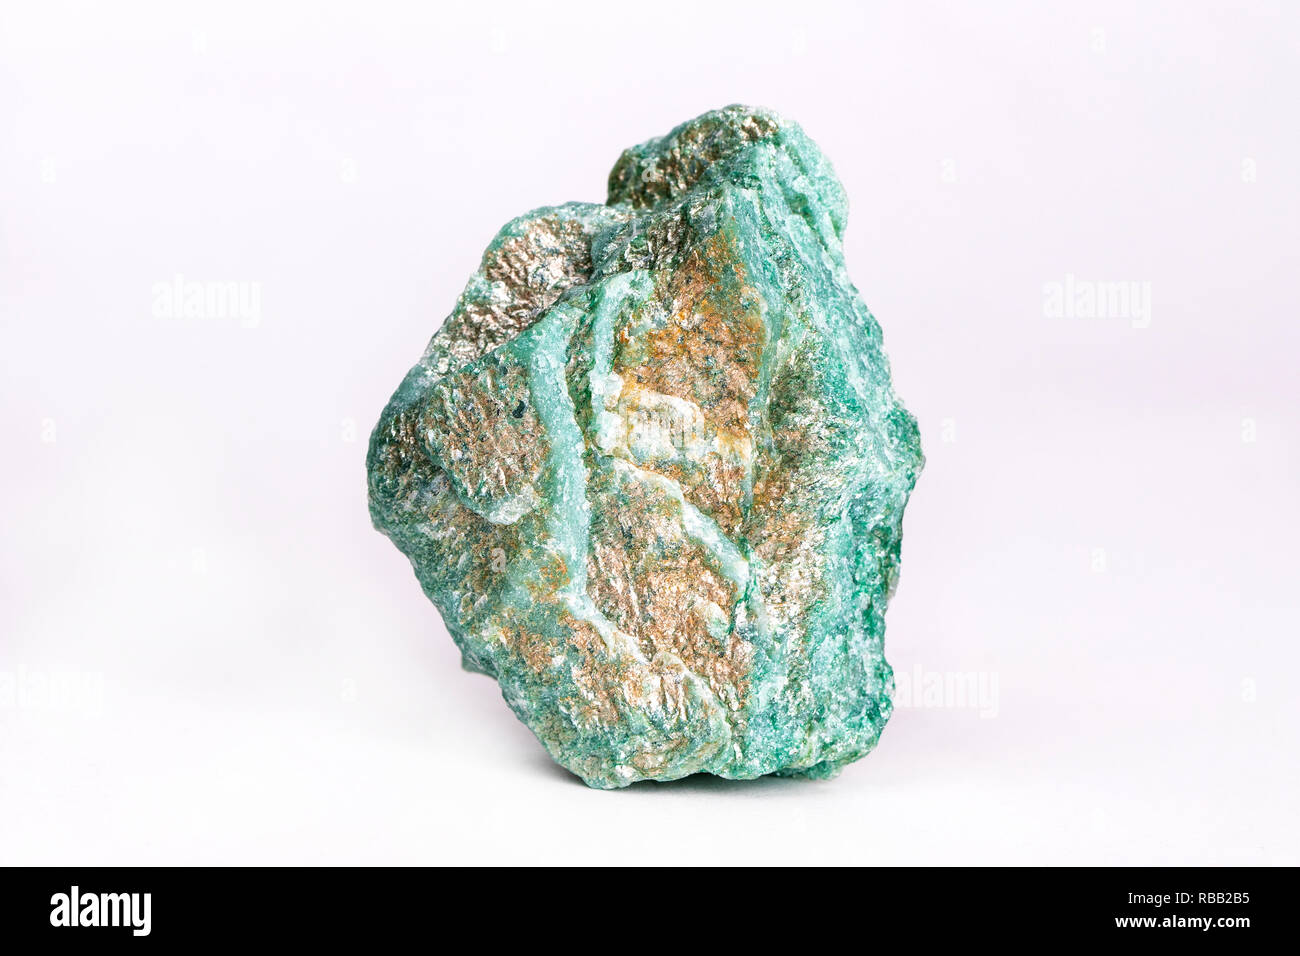 Macro photography of fuchsite natural mineral (chrome mica) on white background Stock Photo